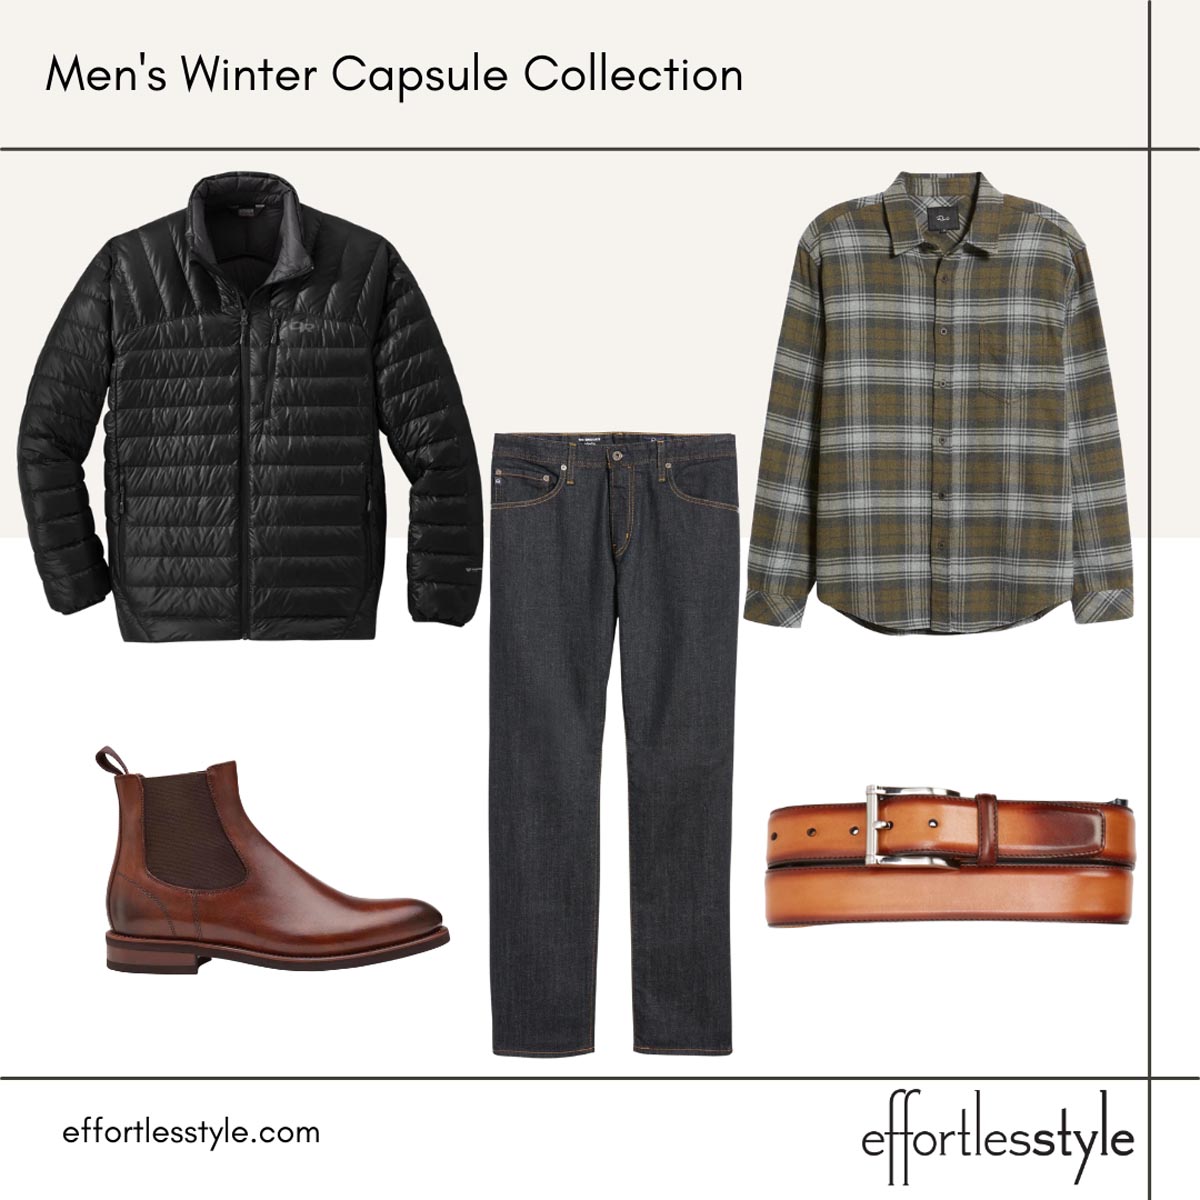 Men's Winter Capsule Collection flannel shirt looks flannel shirt outfits for men flannel shirt style inspiration for guys flannel shirt and boots for guys flannel shirt and jeans flannel shirt and belt